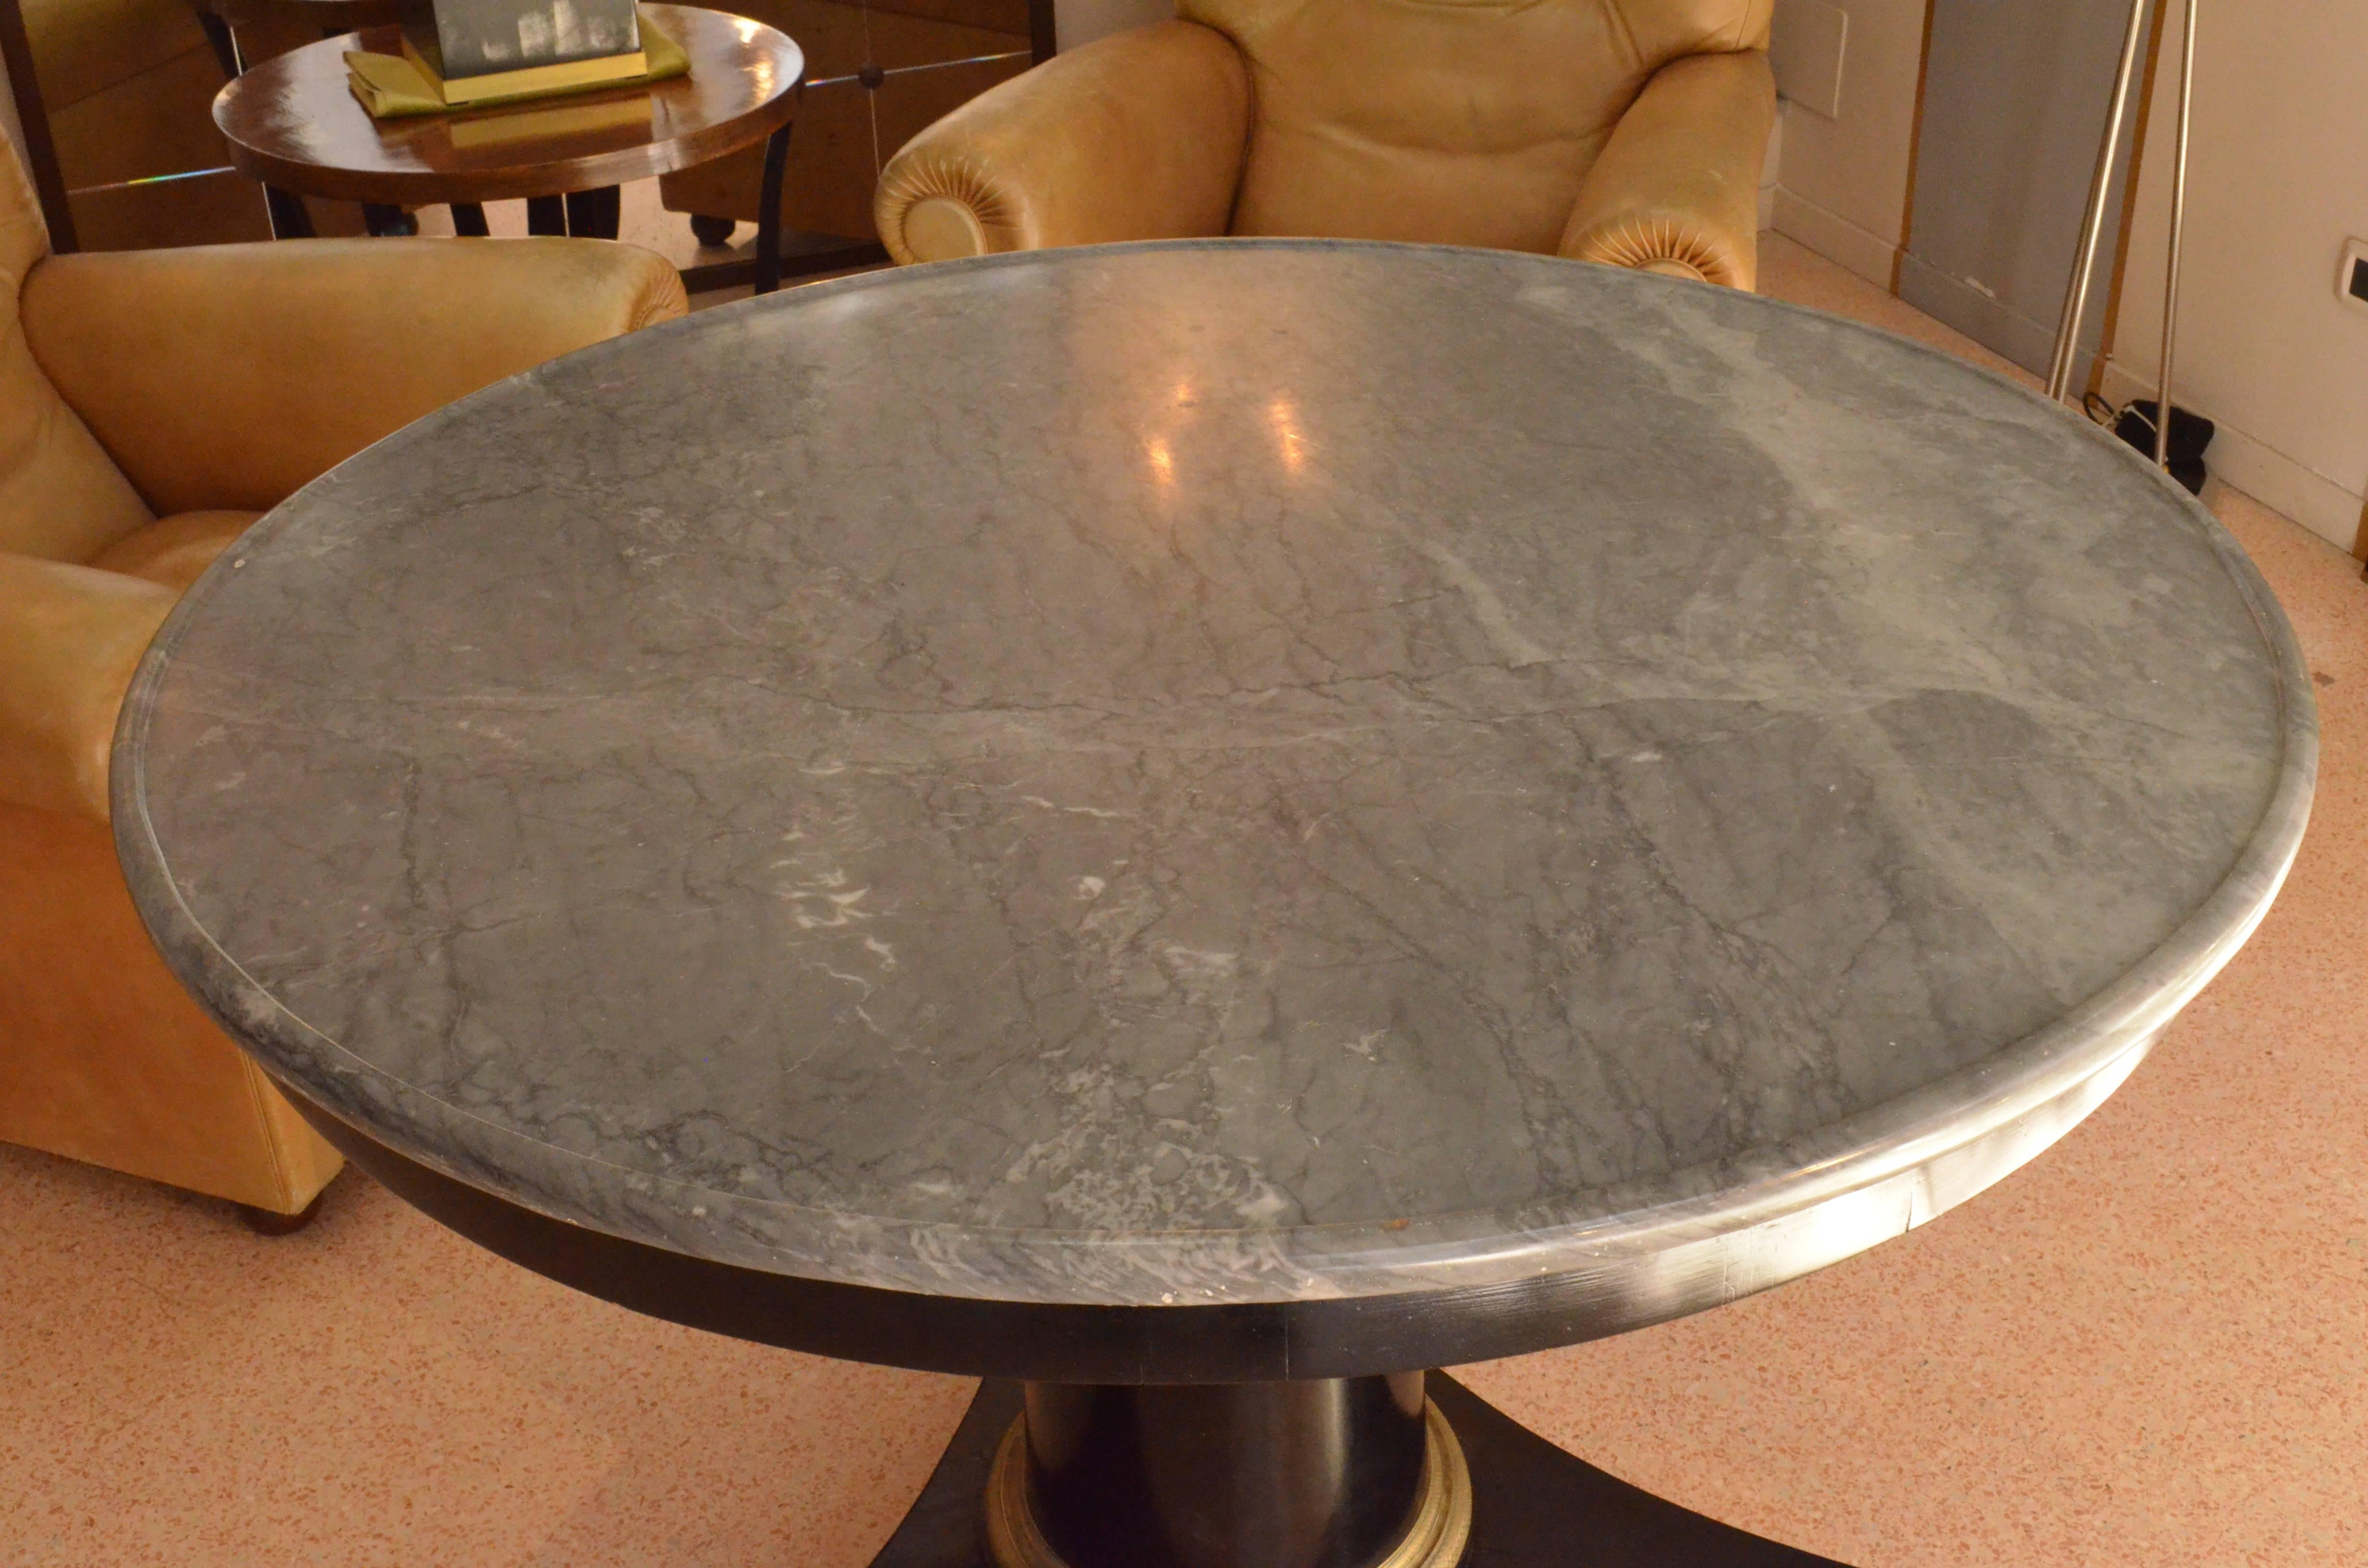 This unique marble-top table is from Italy from the early 19th century from Piemonte region. It features its original Bardiglio marble in excellent condition.
The central leg is in walnut wood ebonized with an original golden bronze finely engraved